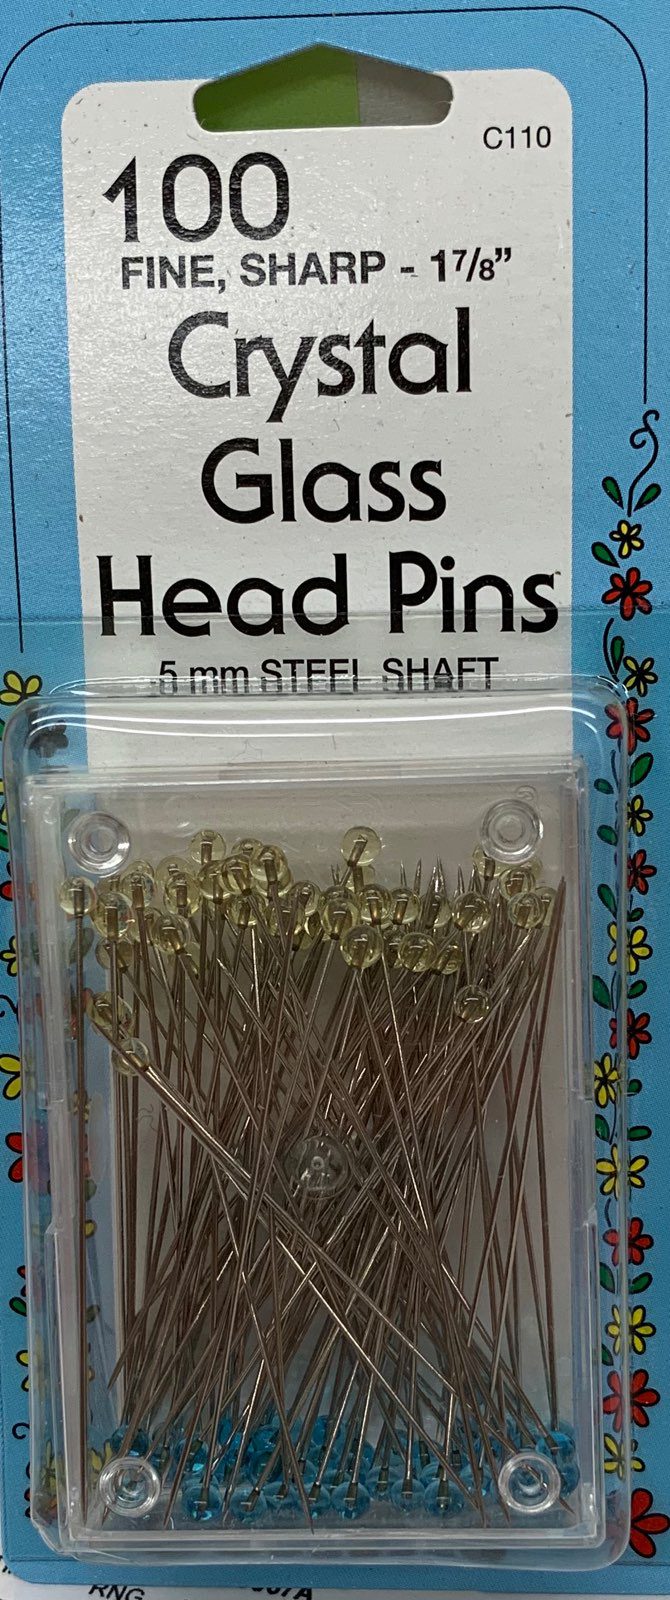 Collins - Crystal Glass Head Pins - 1 7/8" Fine , Sharp - 100count